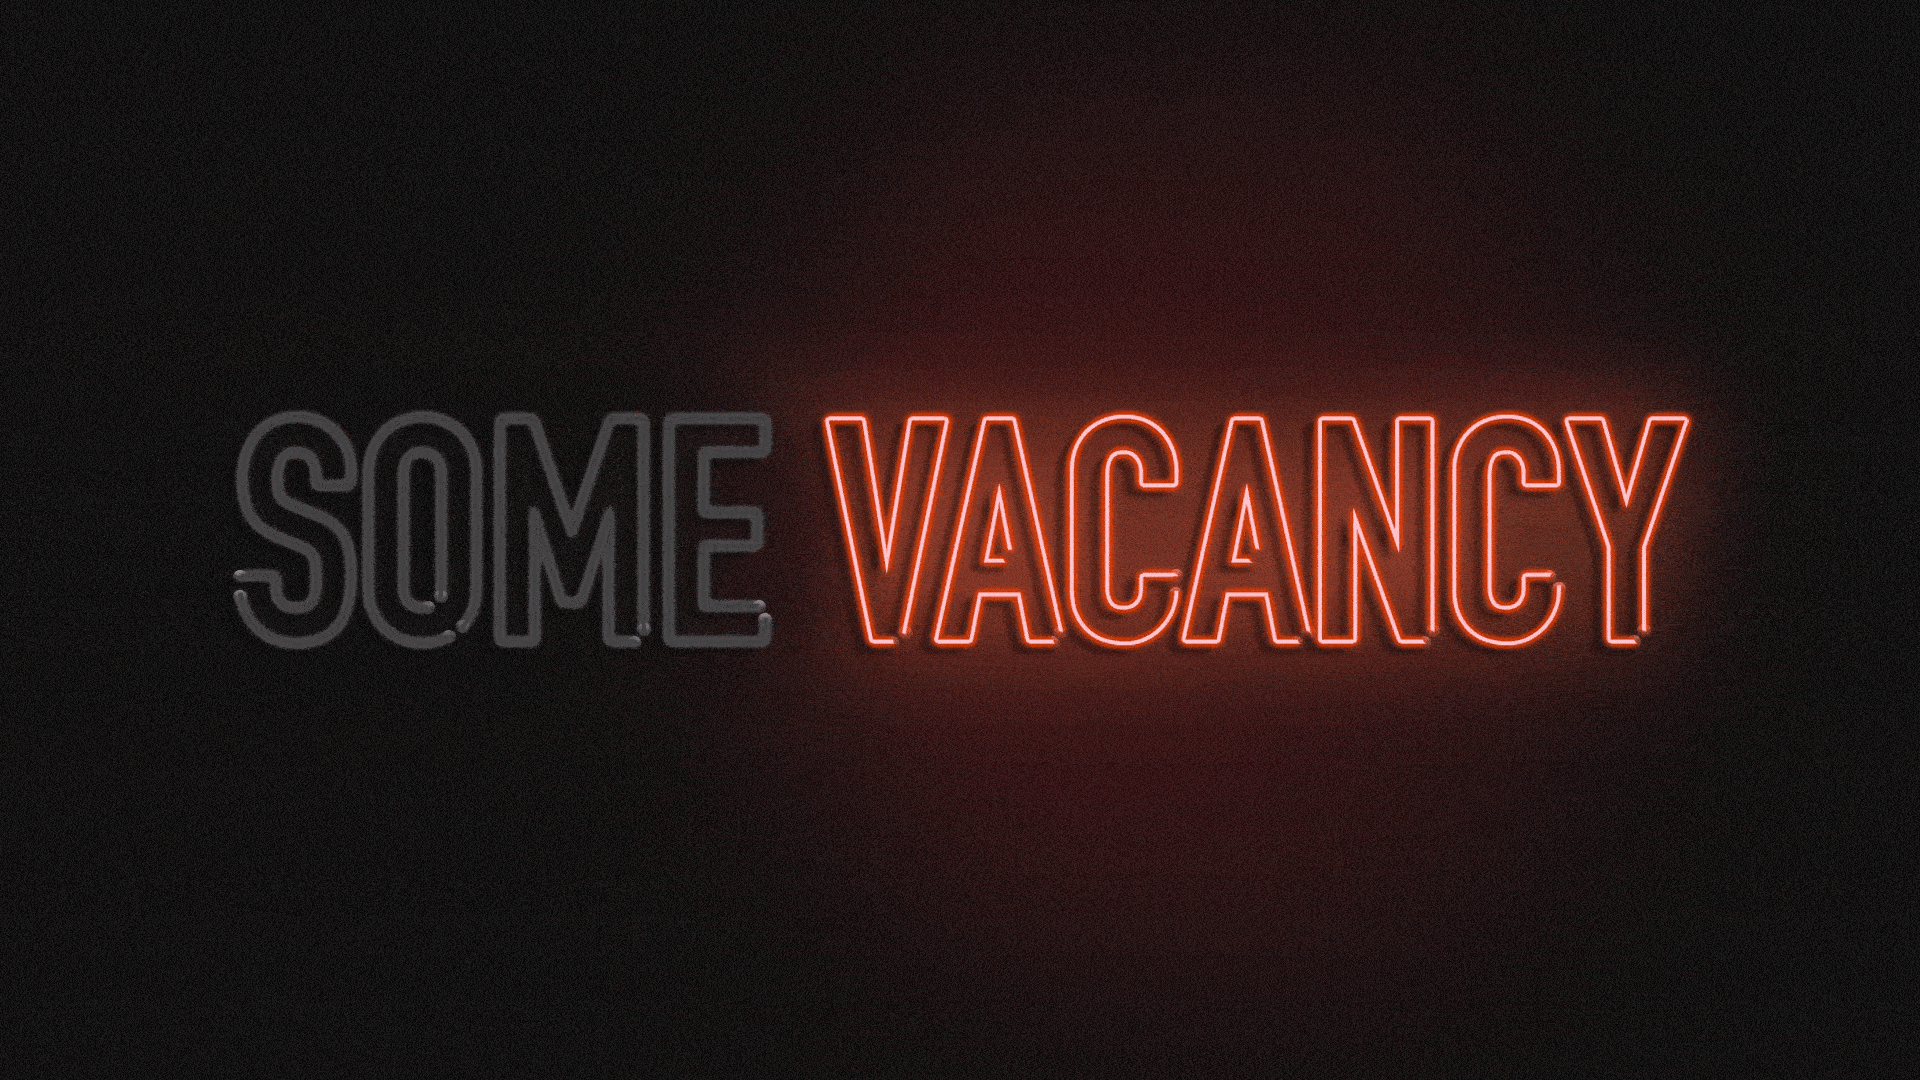 "Some vacancy" sign